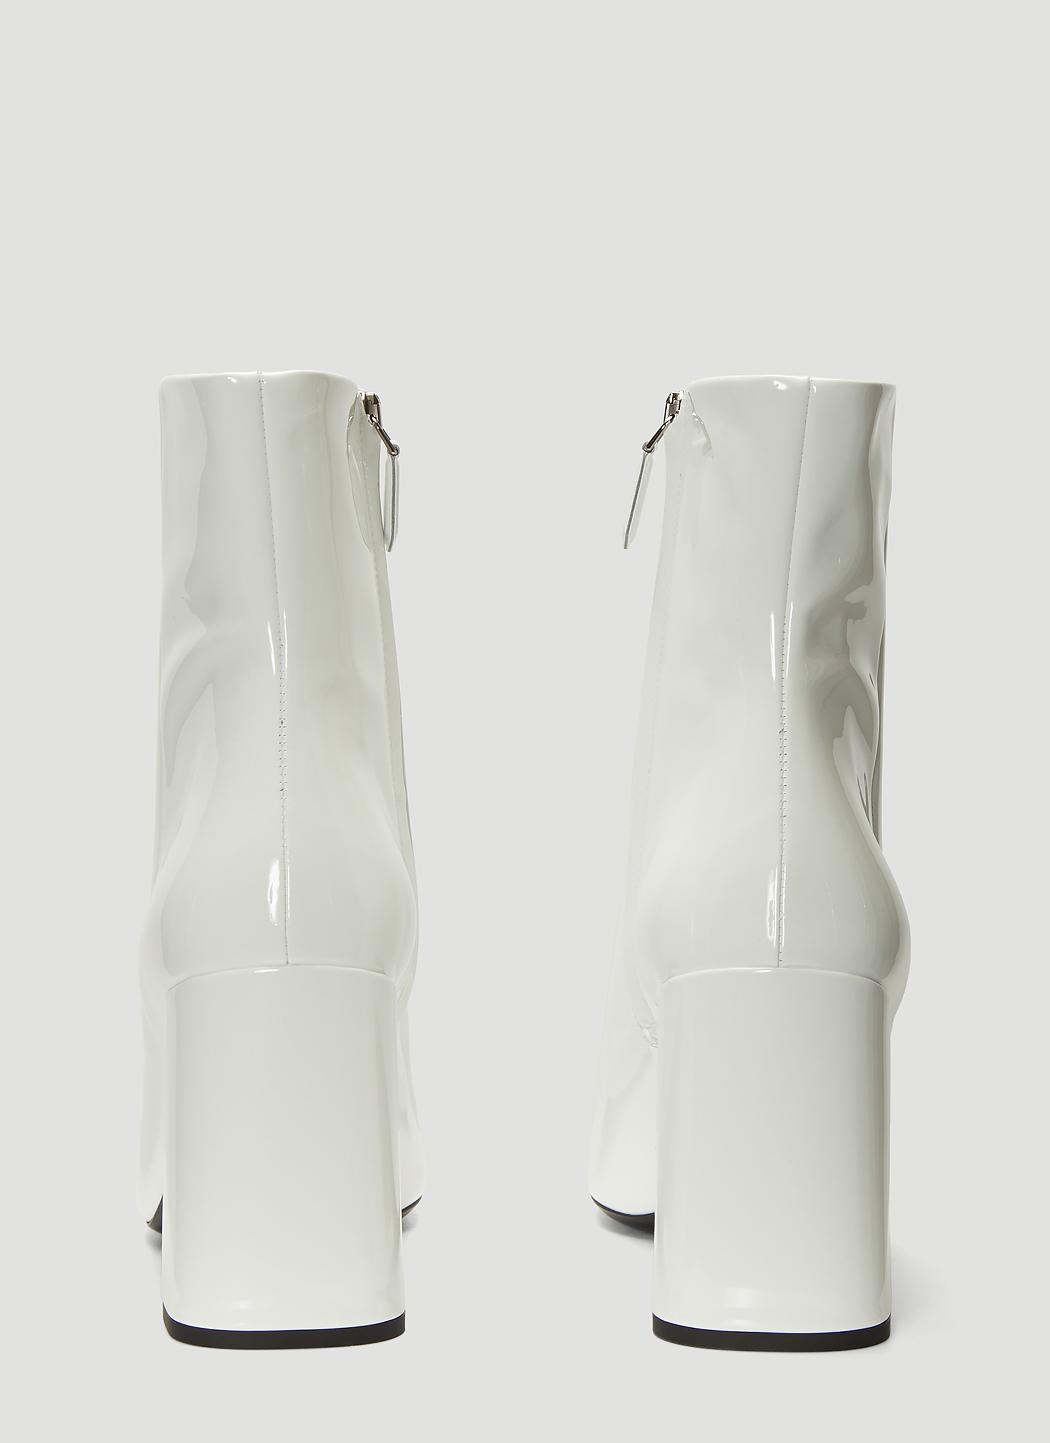 Prada Patent Leather Ankle Boots In White - Lyst